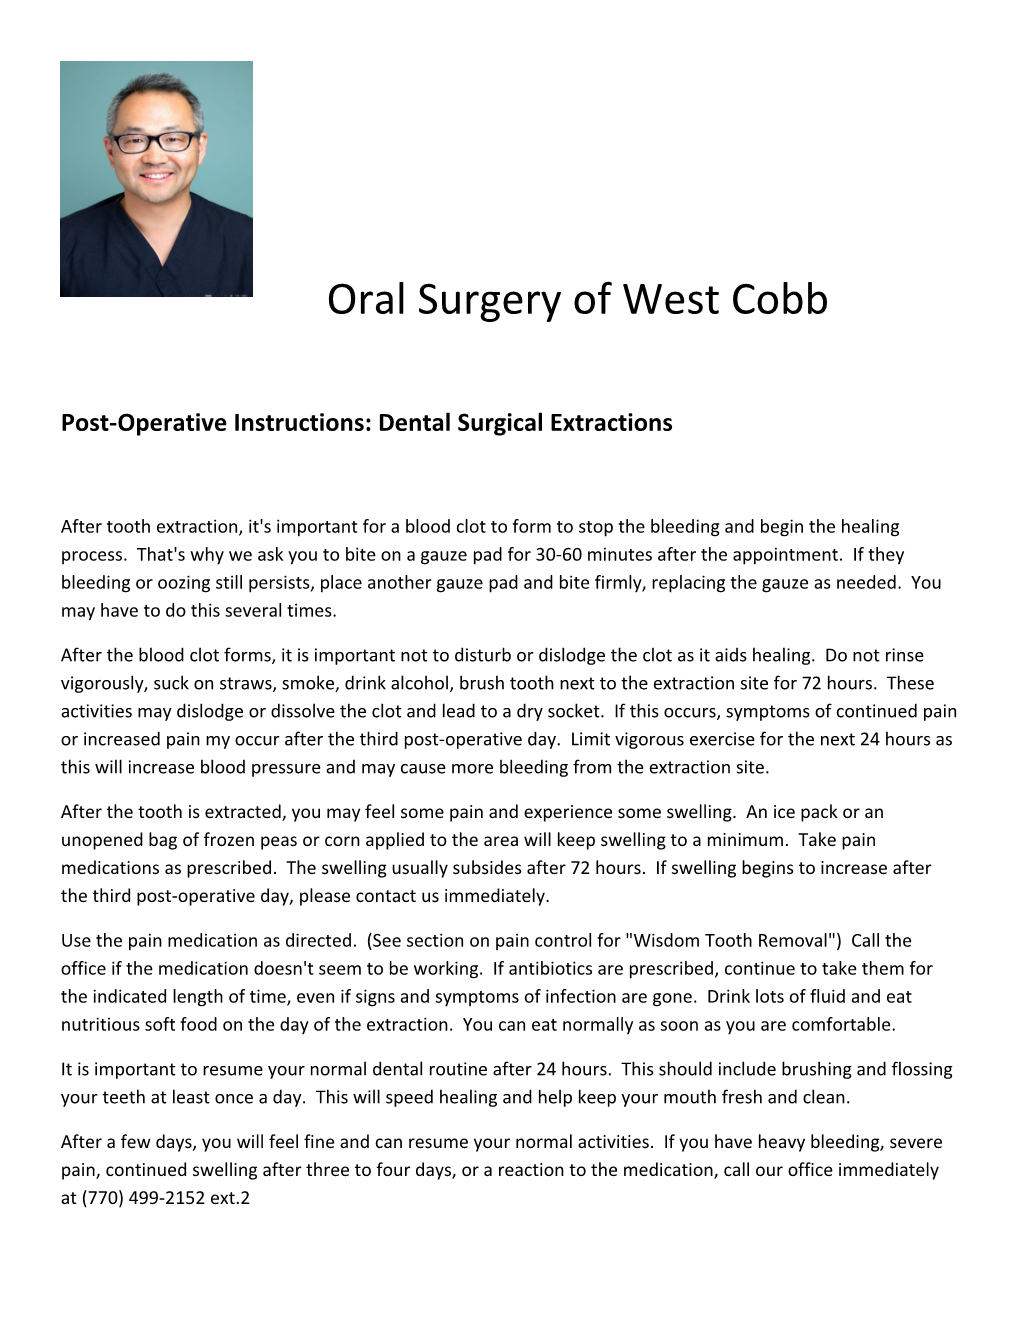 Post-Operative Instructions: Dental Surgical Extractions